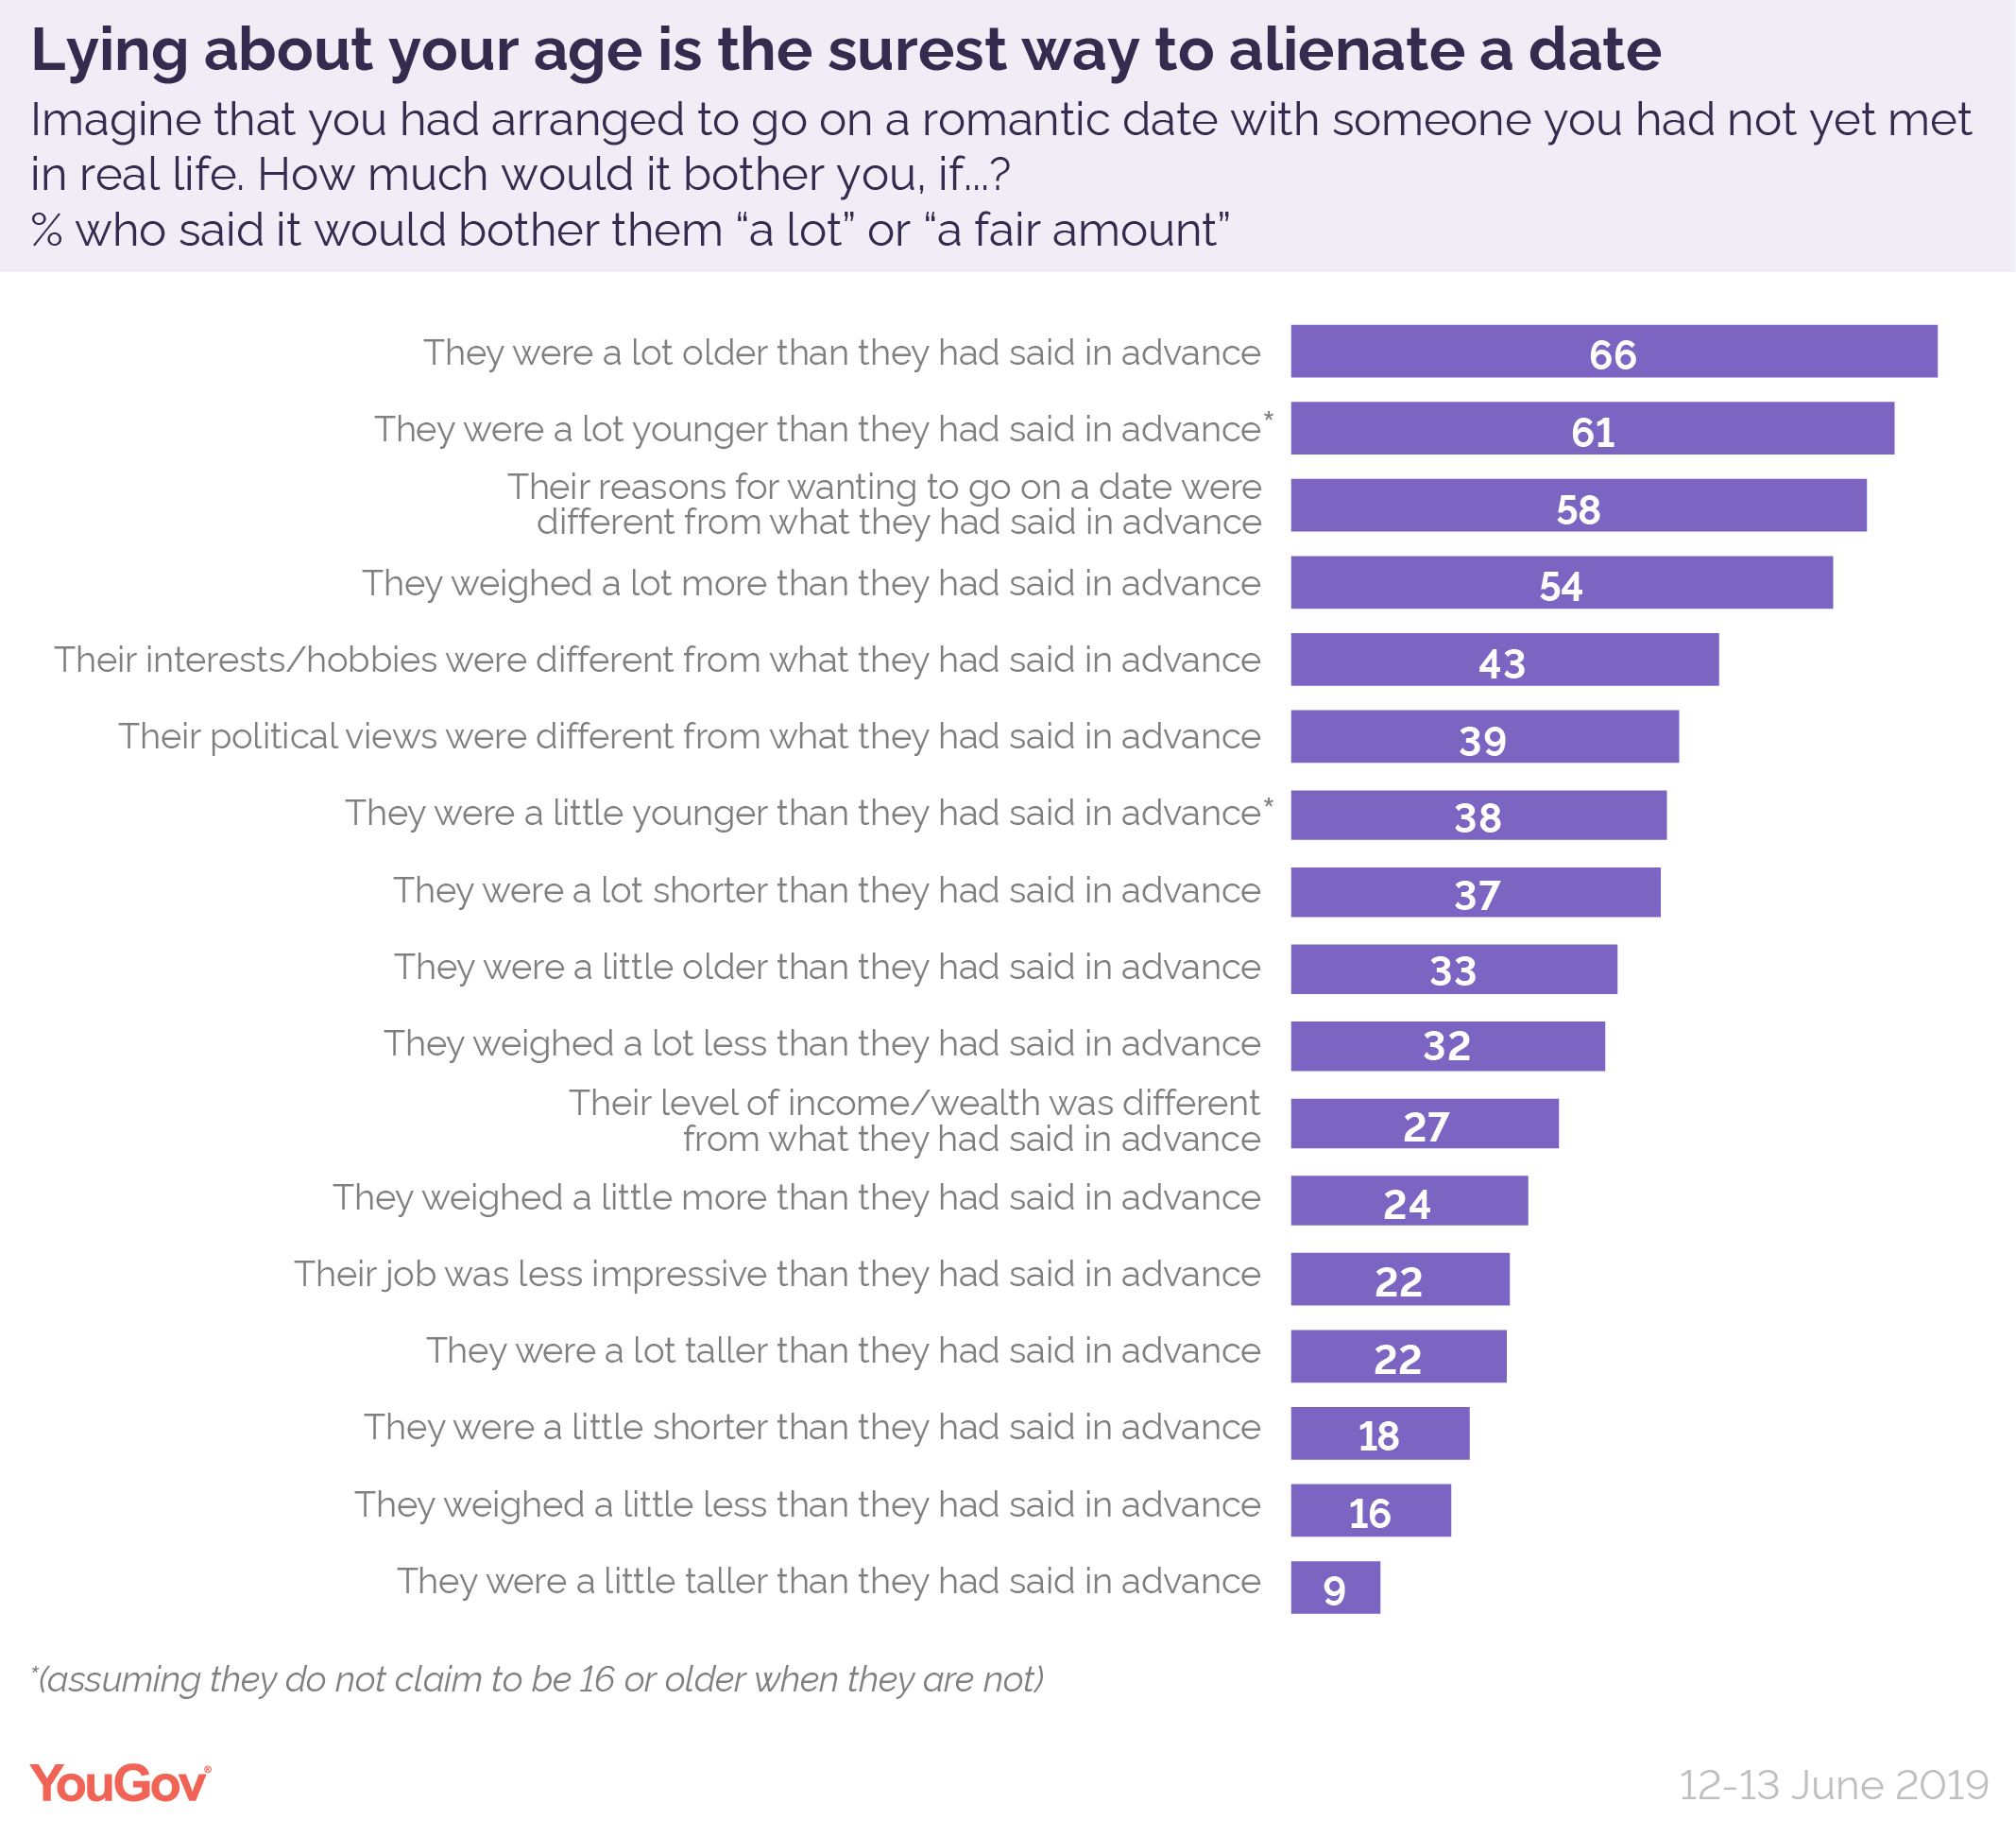 On to women tinder meet age lies younger Lying about